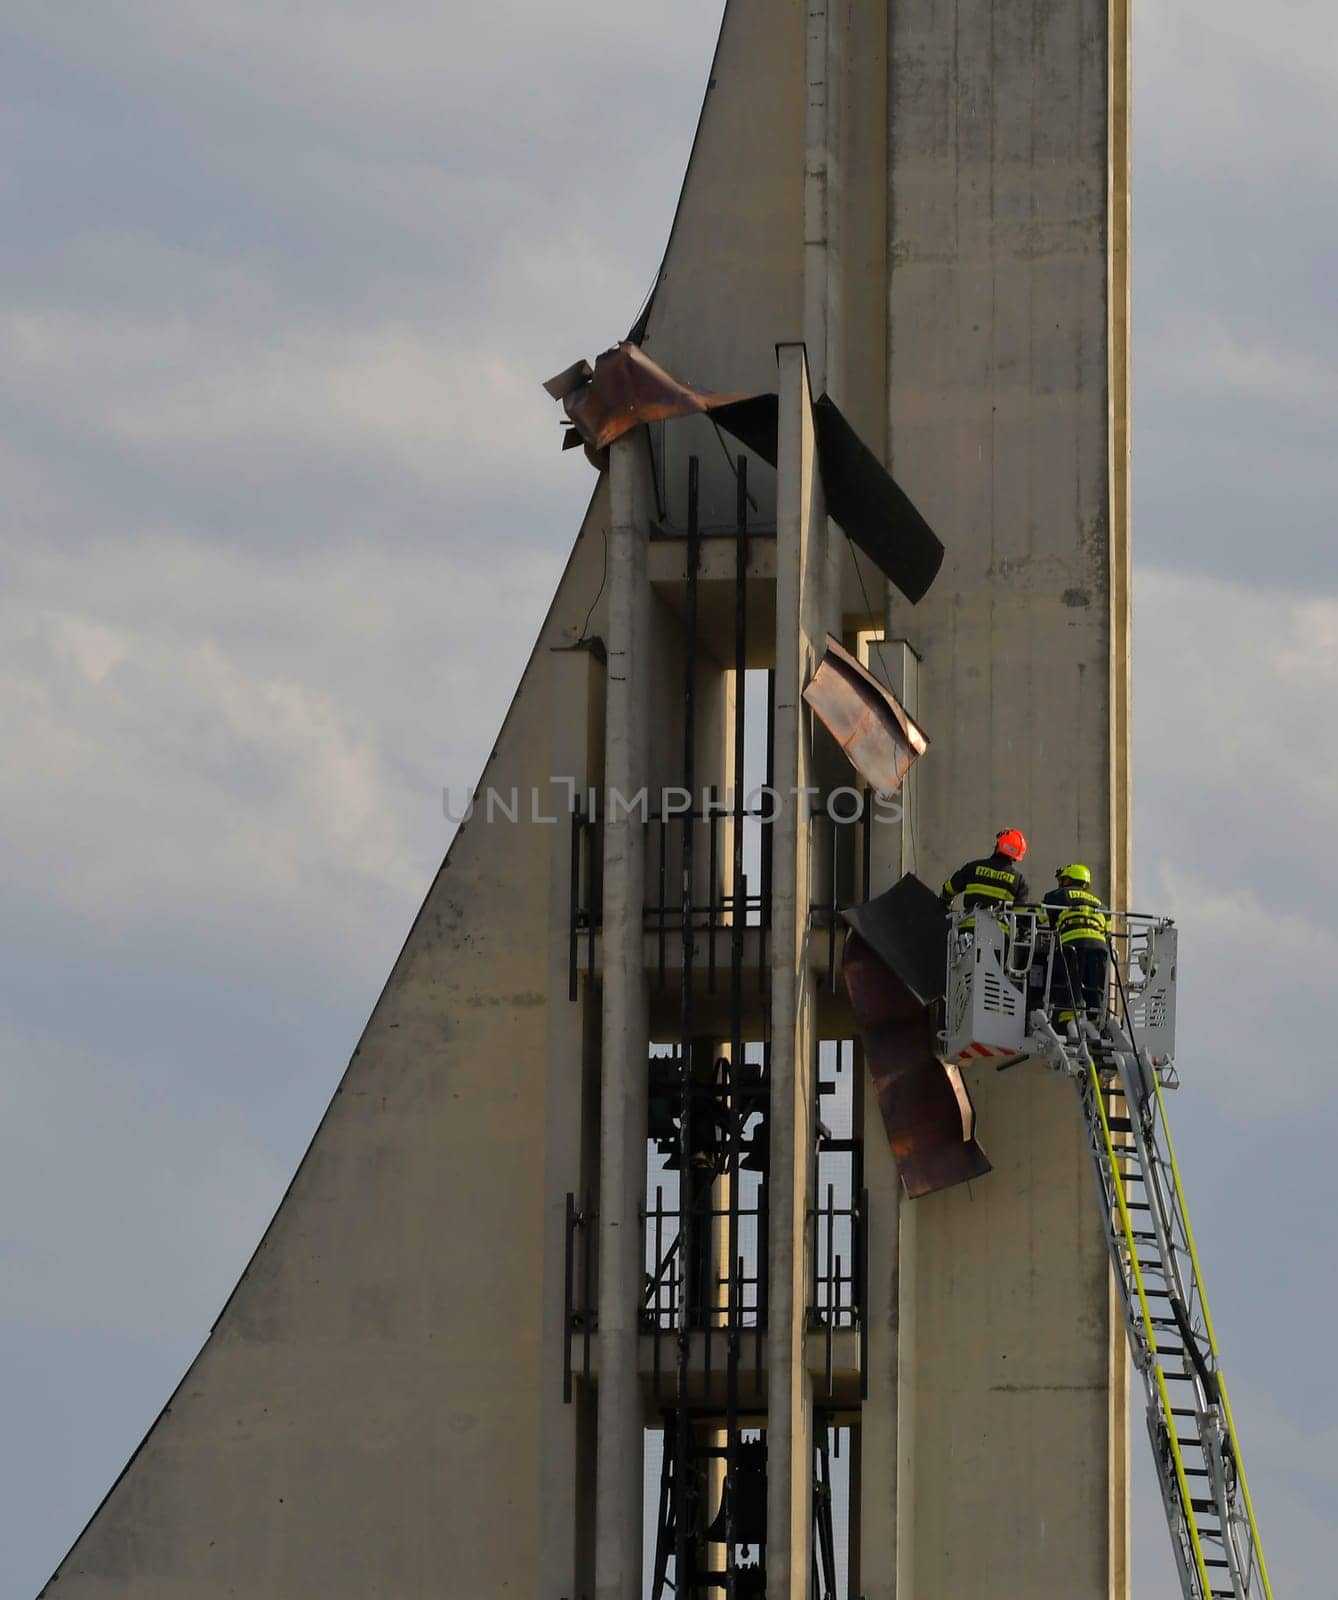 HUSTOPECE, CZECHIA - JULY 27, 2023: Firefighters at the church tower. Firefighter intervention at a high-rise building. Firefighters at the church tower. Firefighter intervention at a high-rise building. Firefighters take off metal sheets from the roof.